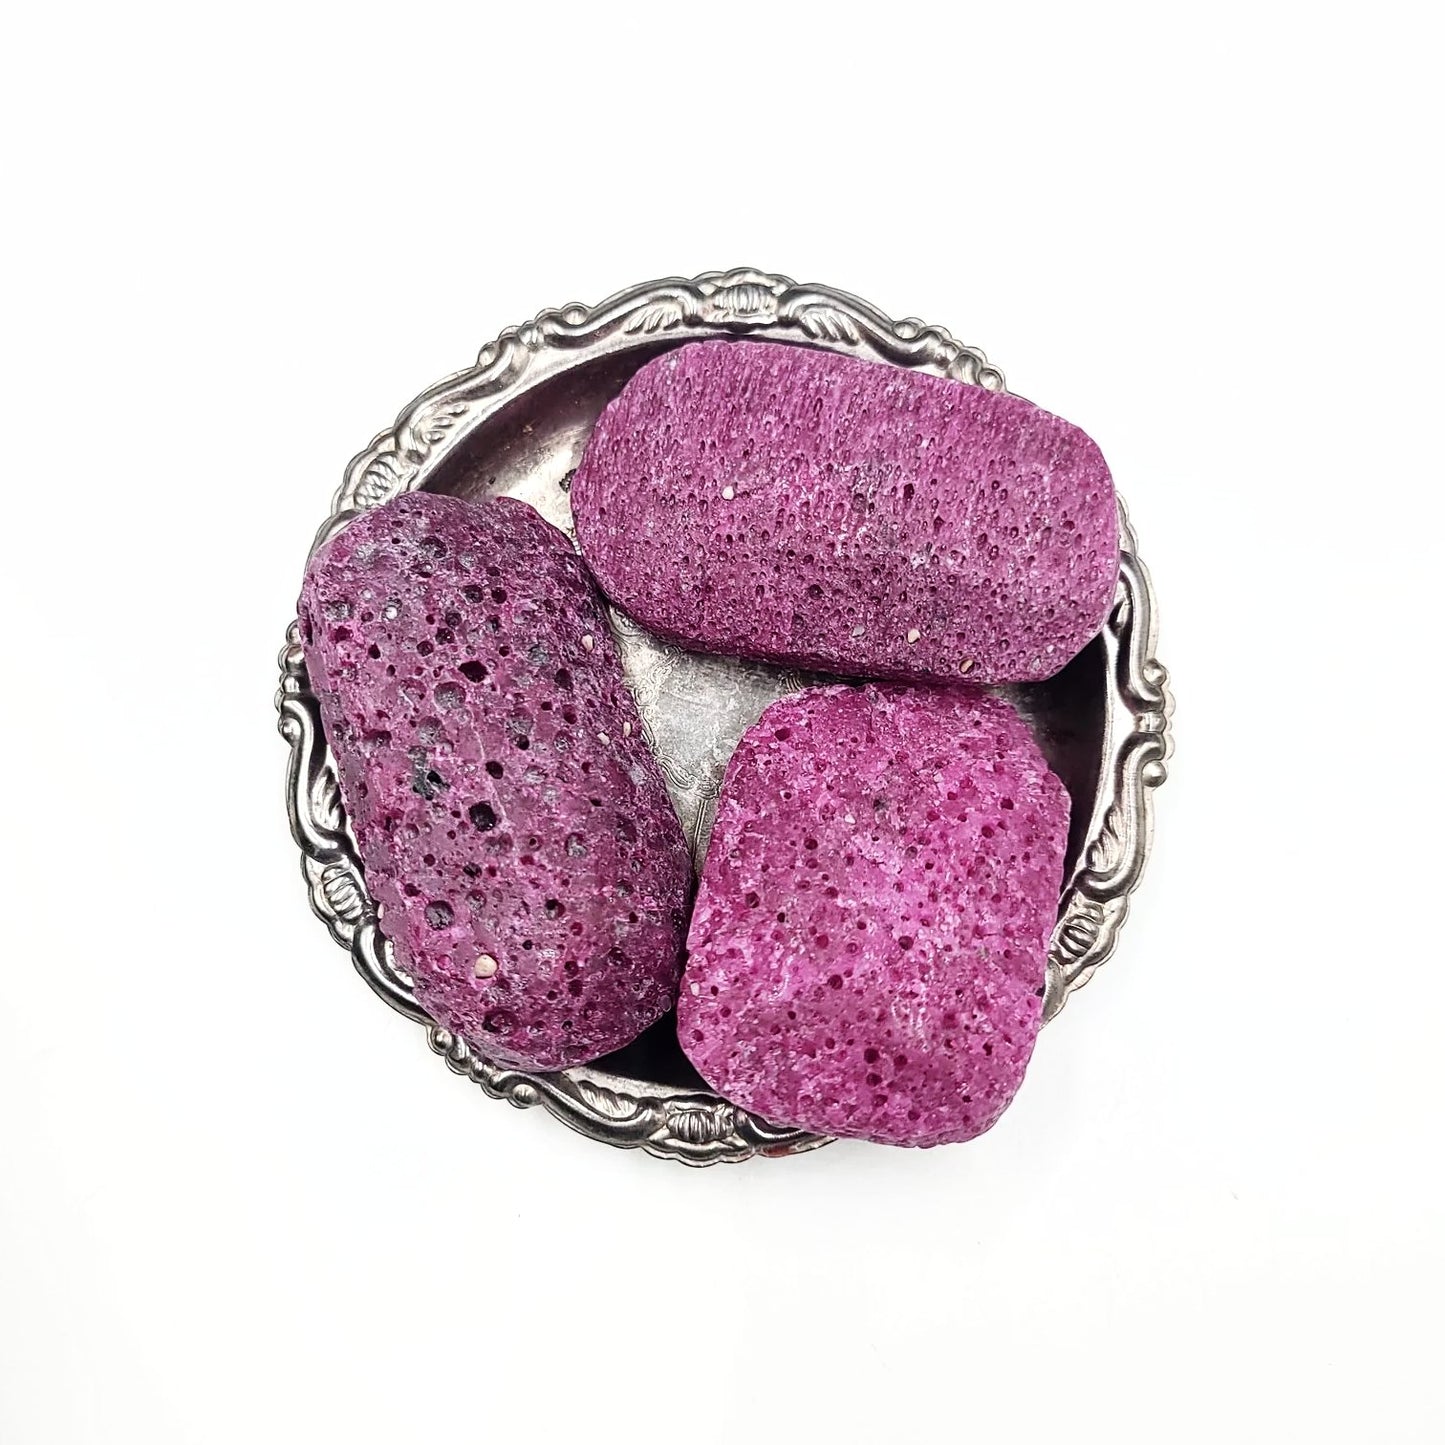 Ruby Palm Stone Gallet - Elevated Metaphysical